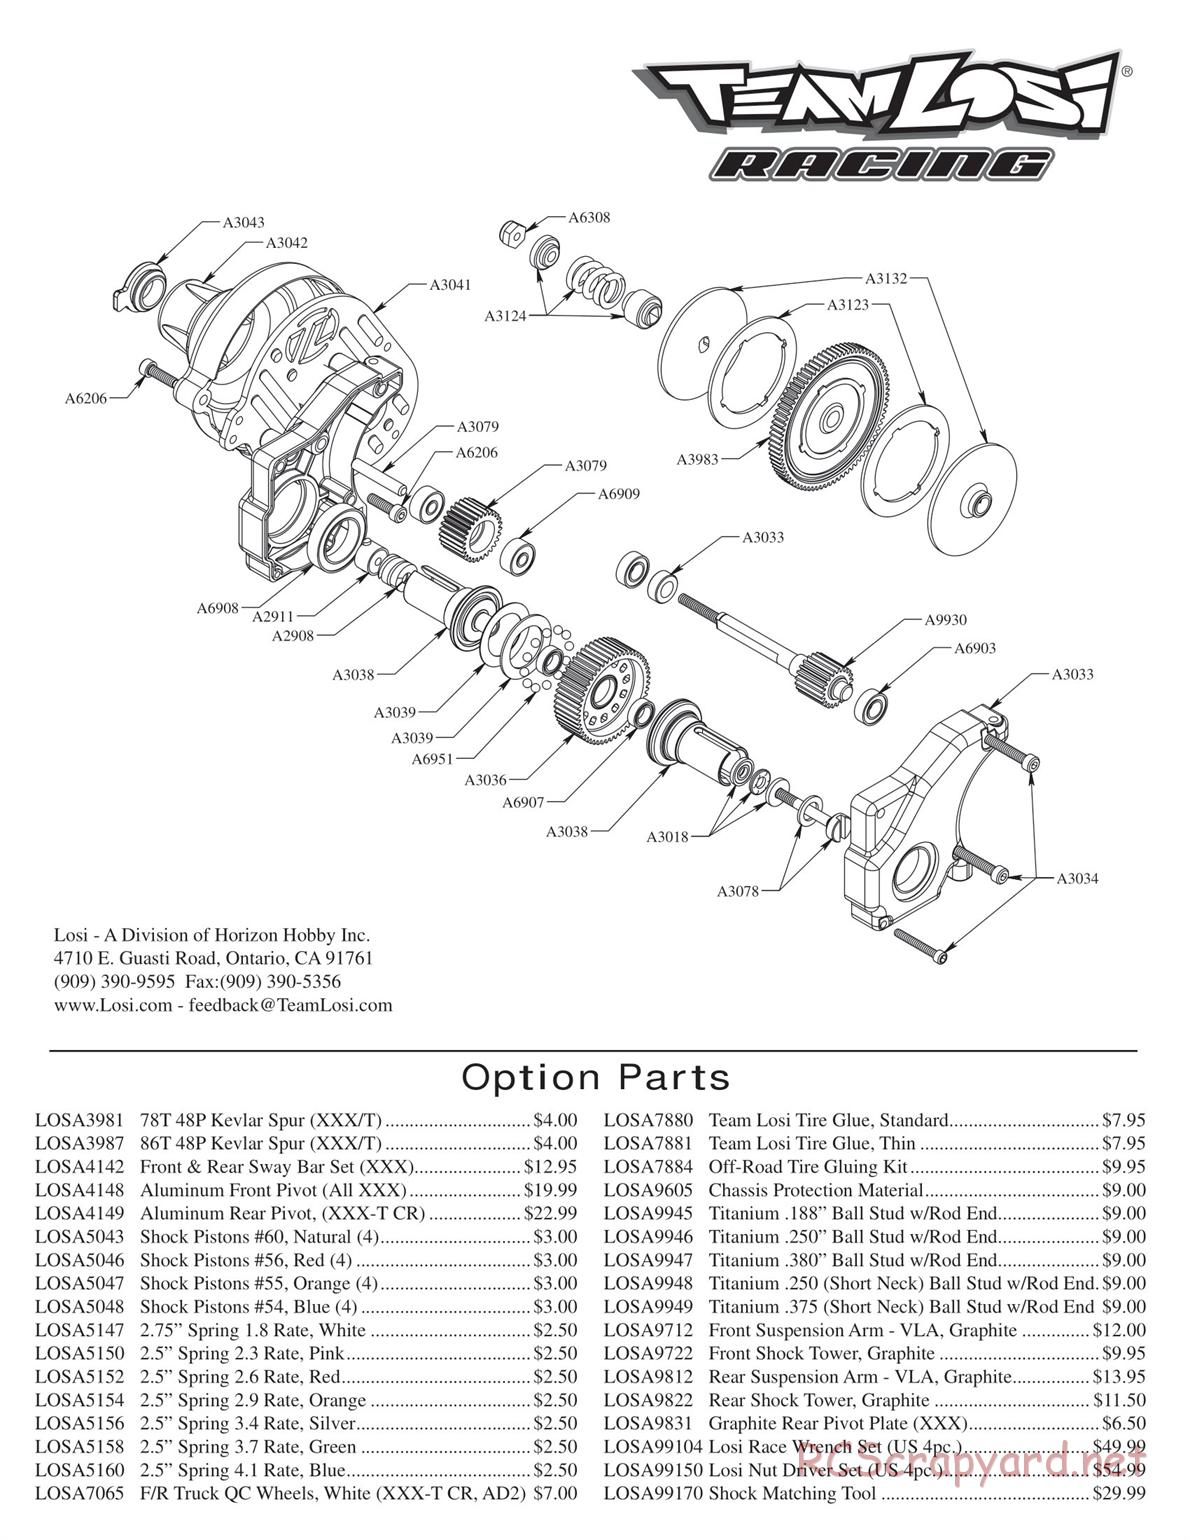 Team Losi - XXXT CR - Manual - Page 3